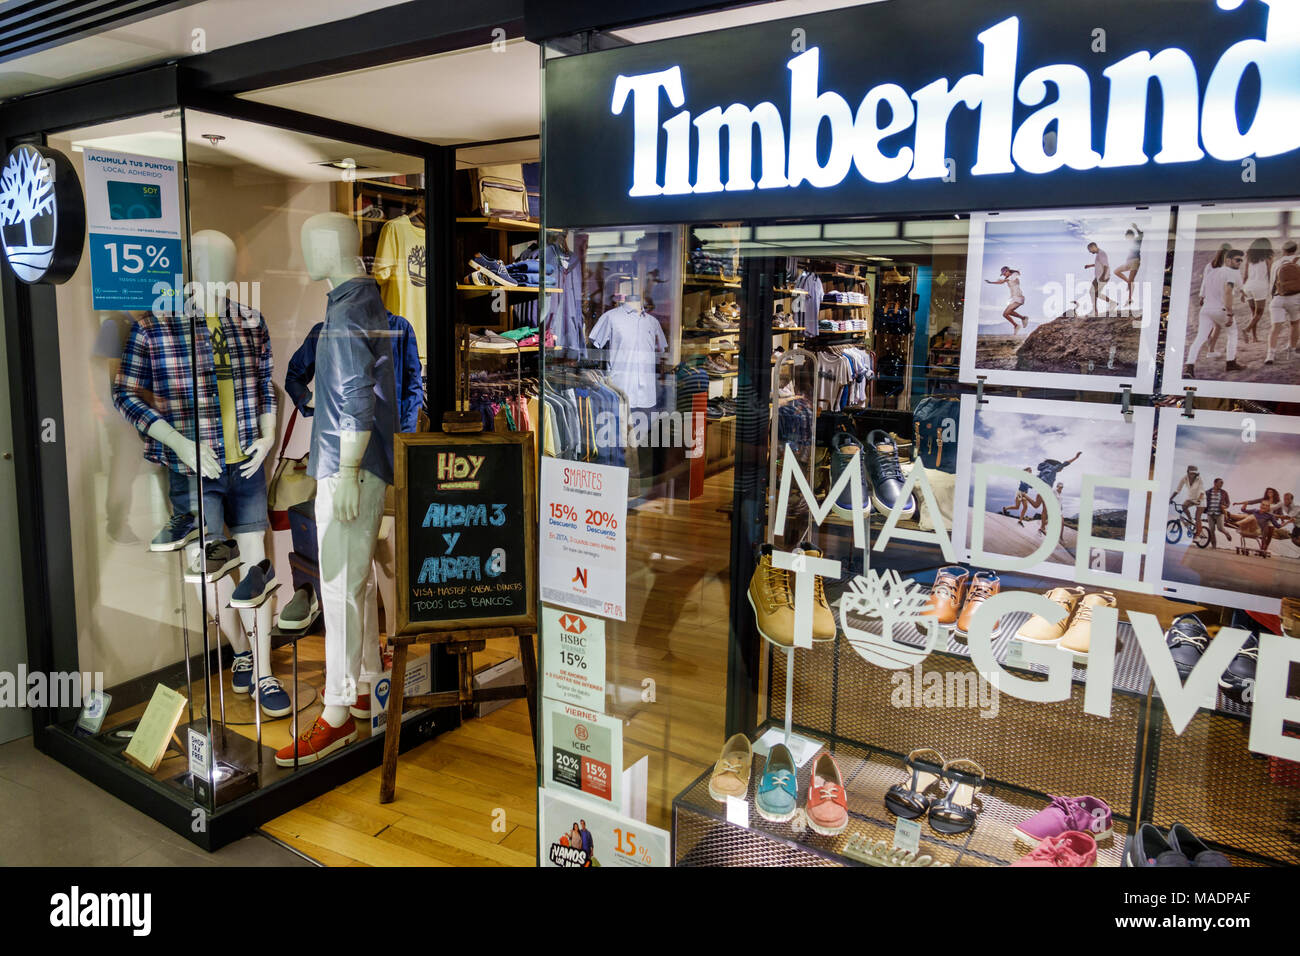 Buenos Aires Argentina,Recoleta mall,Timberland,store,American,window  display,clothing,shoes,mannequin,Hispanic,ARG171130271 Stock Photo - Alamy